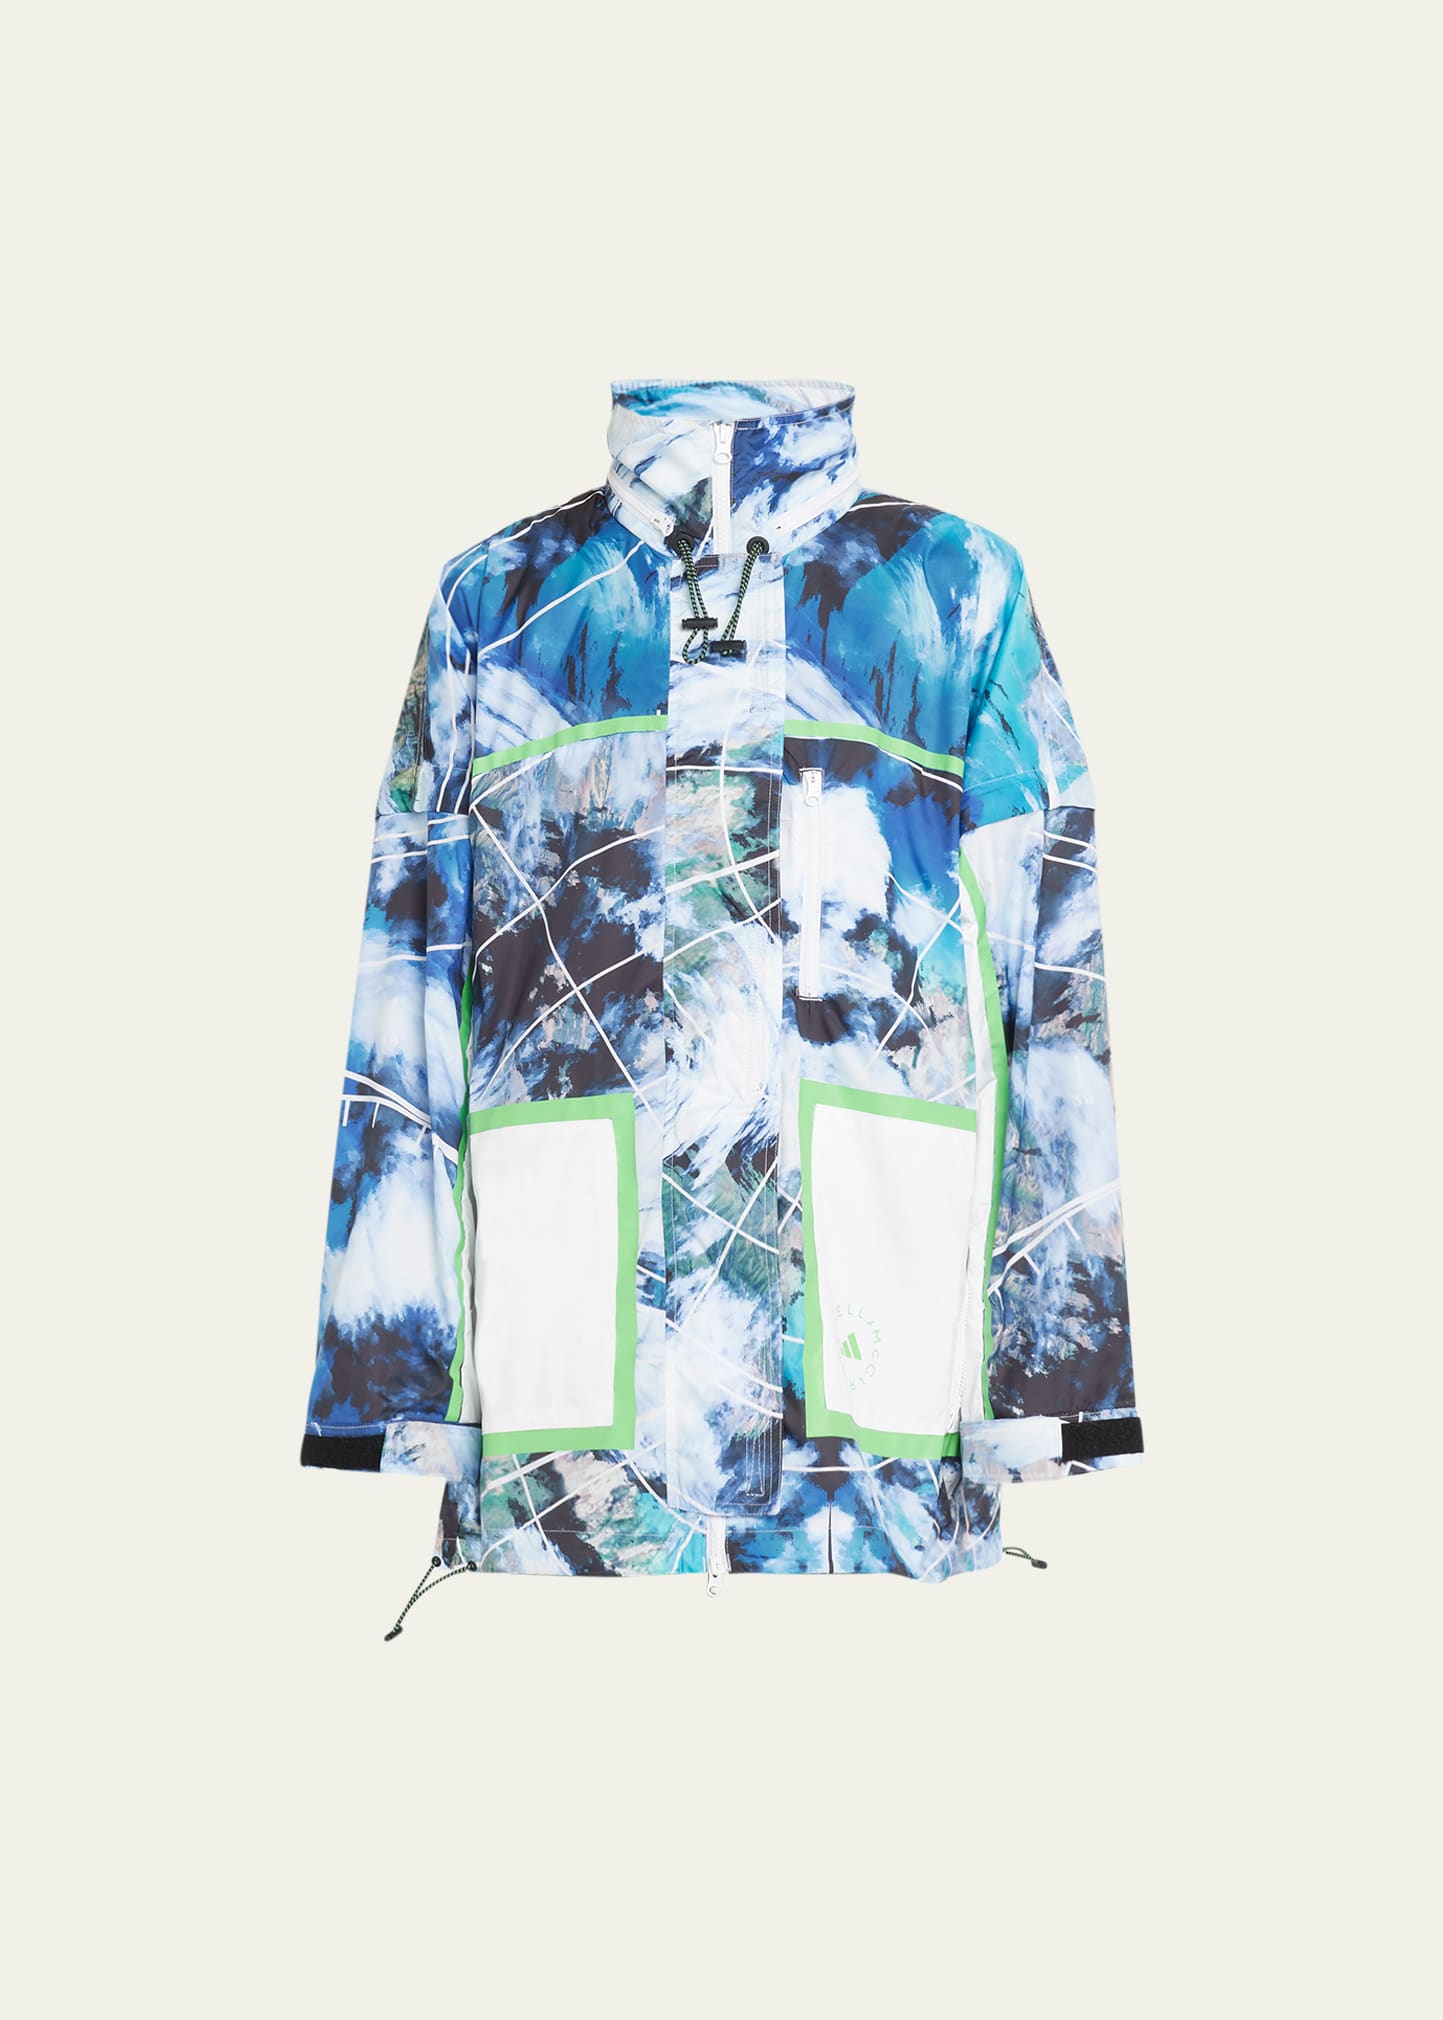 Adidas By Stella Mccartney Truenature Hover Float Print Packable Jacket In White